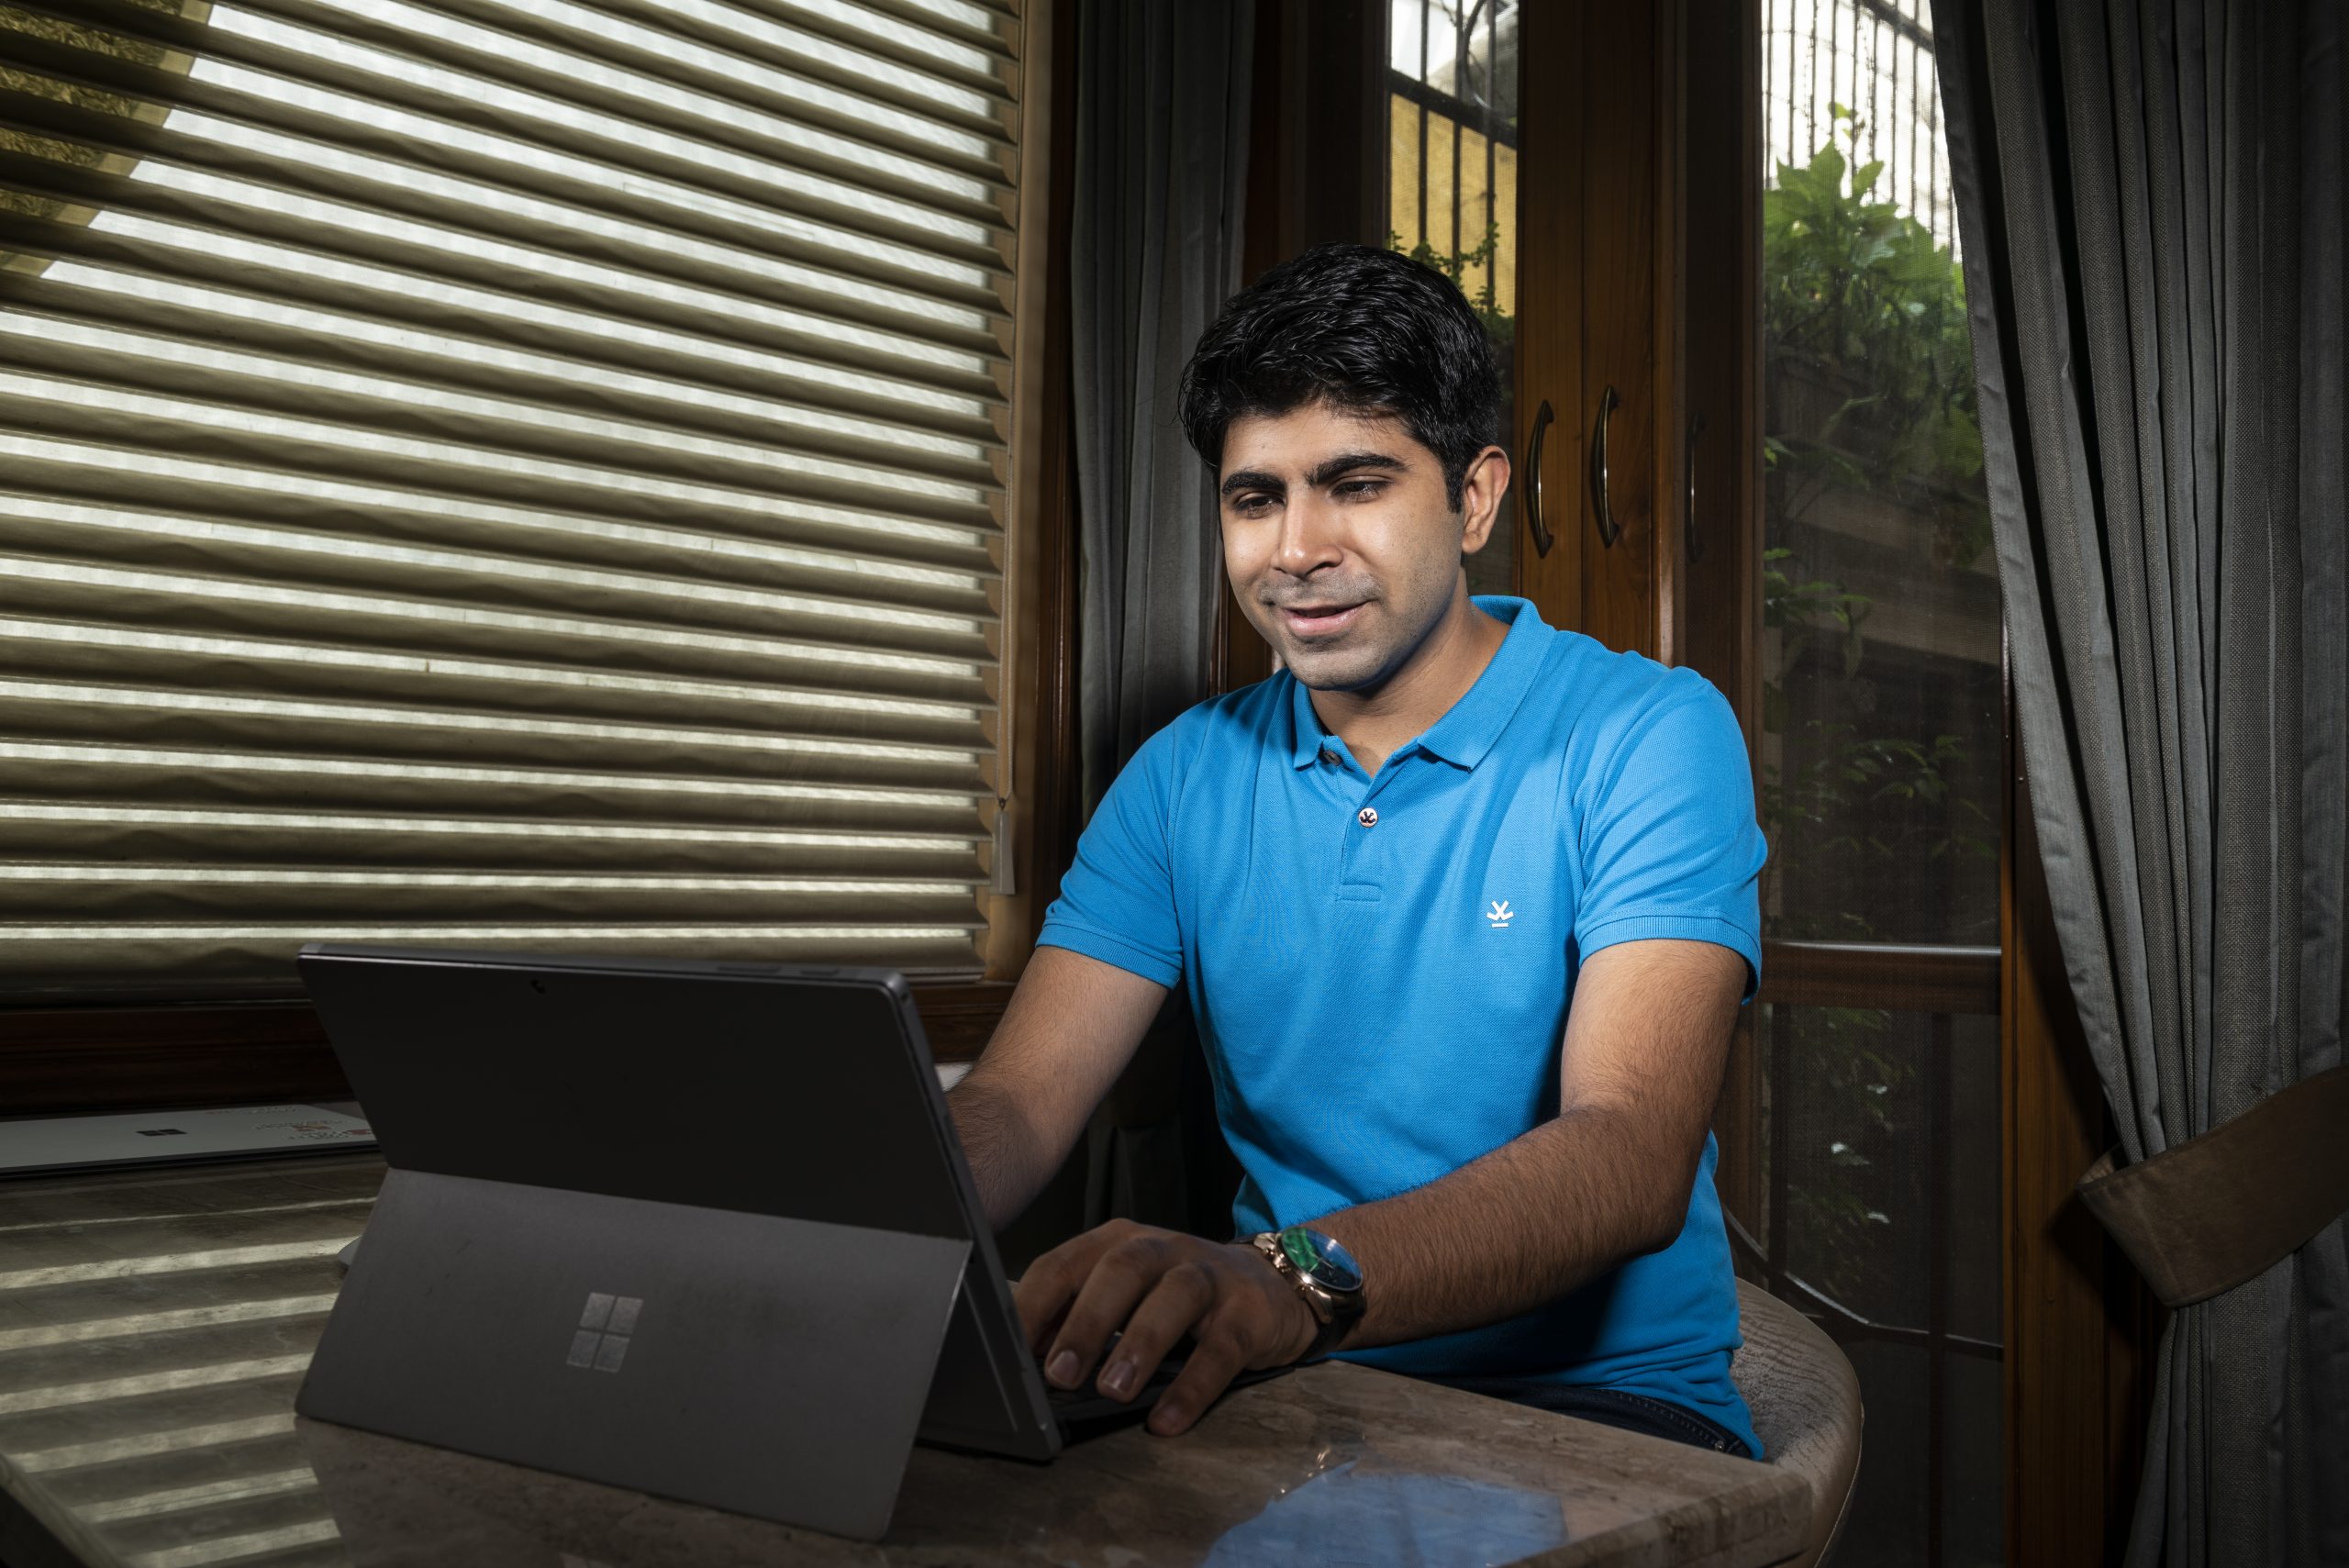 a man wearing a blue t-shirt working on a Surface Pro laptop